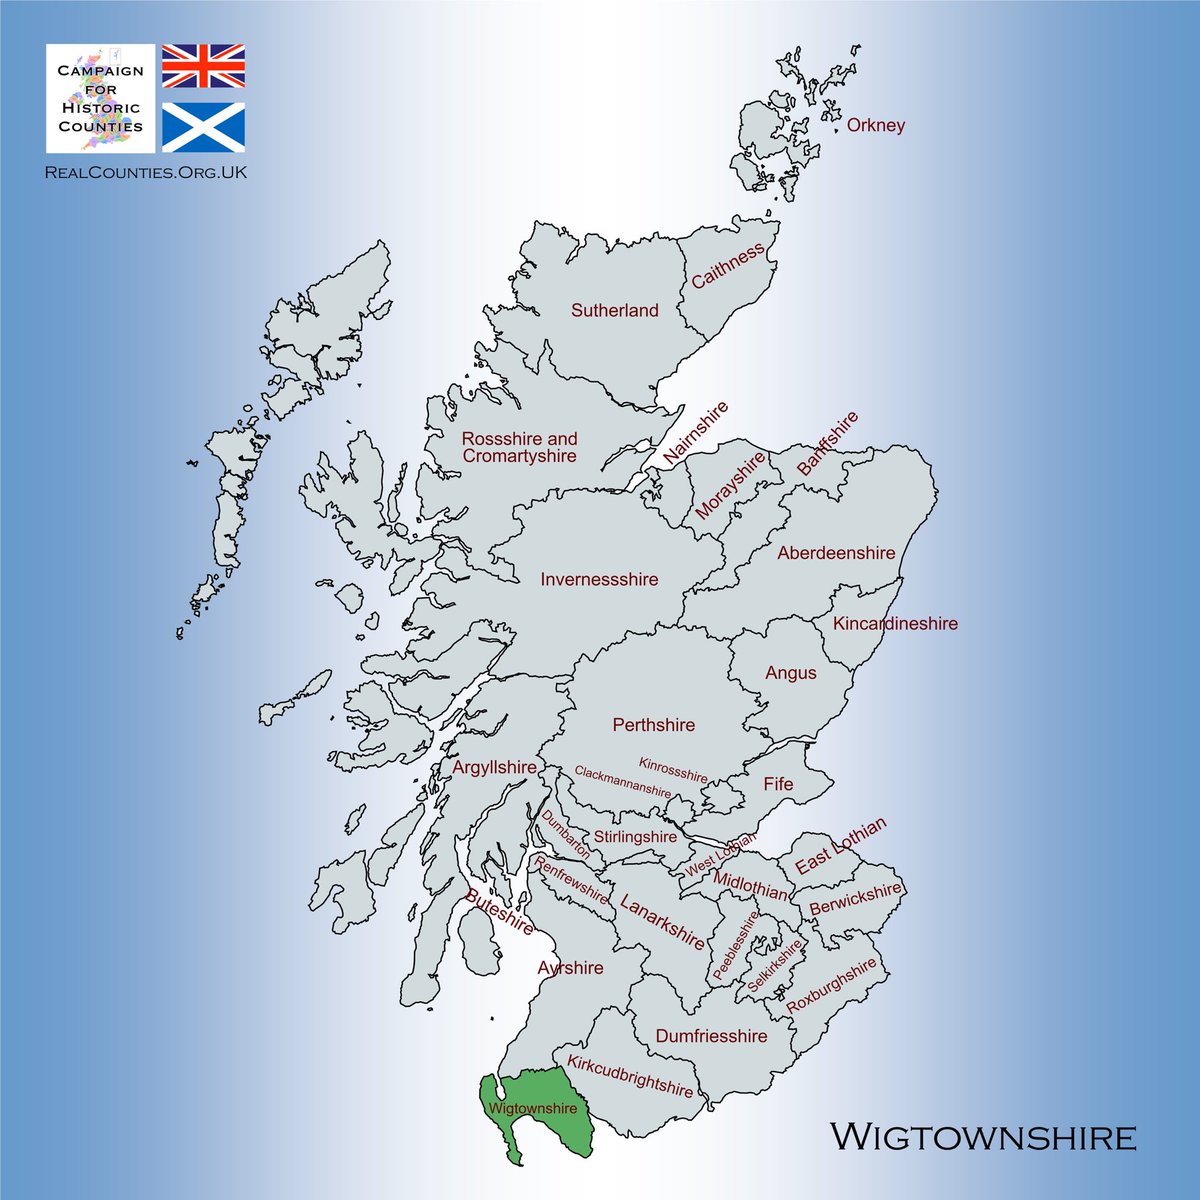 The County of #Wigtown is a shire in the south-western corner of Scotland.

#Wigtownshire is also known as West Galloway.

(Galloway being formed by Wigtownshire and neighbouring Kirkcudbrightshire together.)

🇬🇧 #HistoricCounties | #RealCounties 🏴󠁧󠁢󠁳󠁣󠁴󠁿